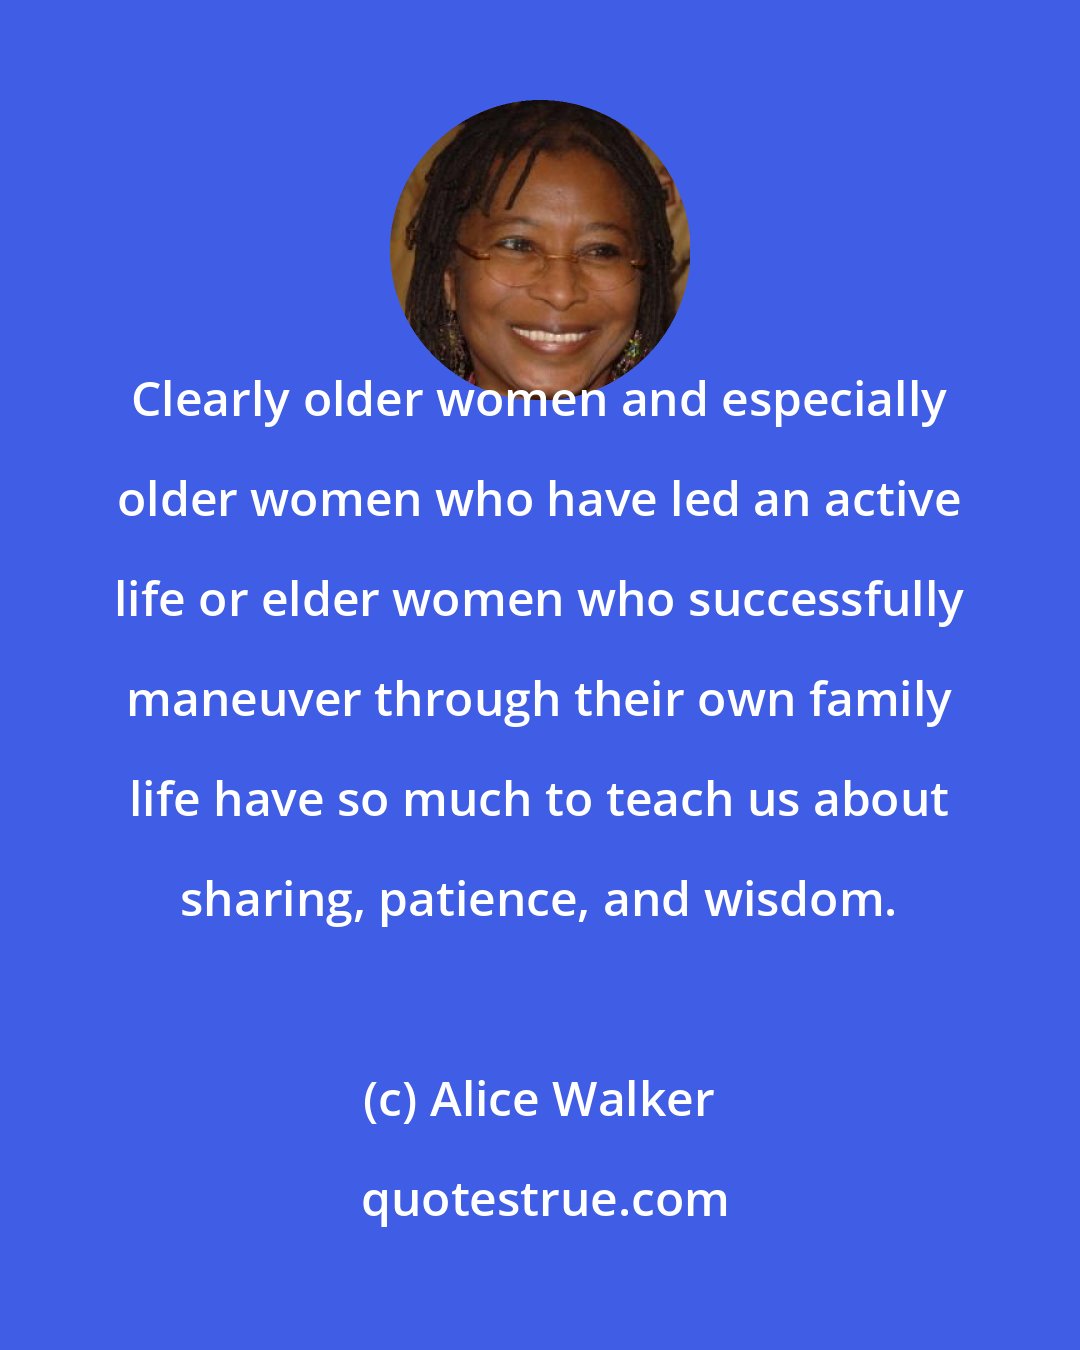 Alice Walker: Clearly older women and especially older women who have led an active life or elder women who successfully maneuver through their own family life have so much to teach us about sharing, patience, and wisdom.